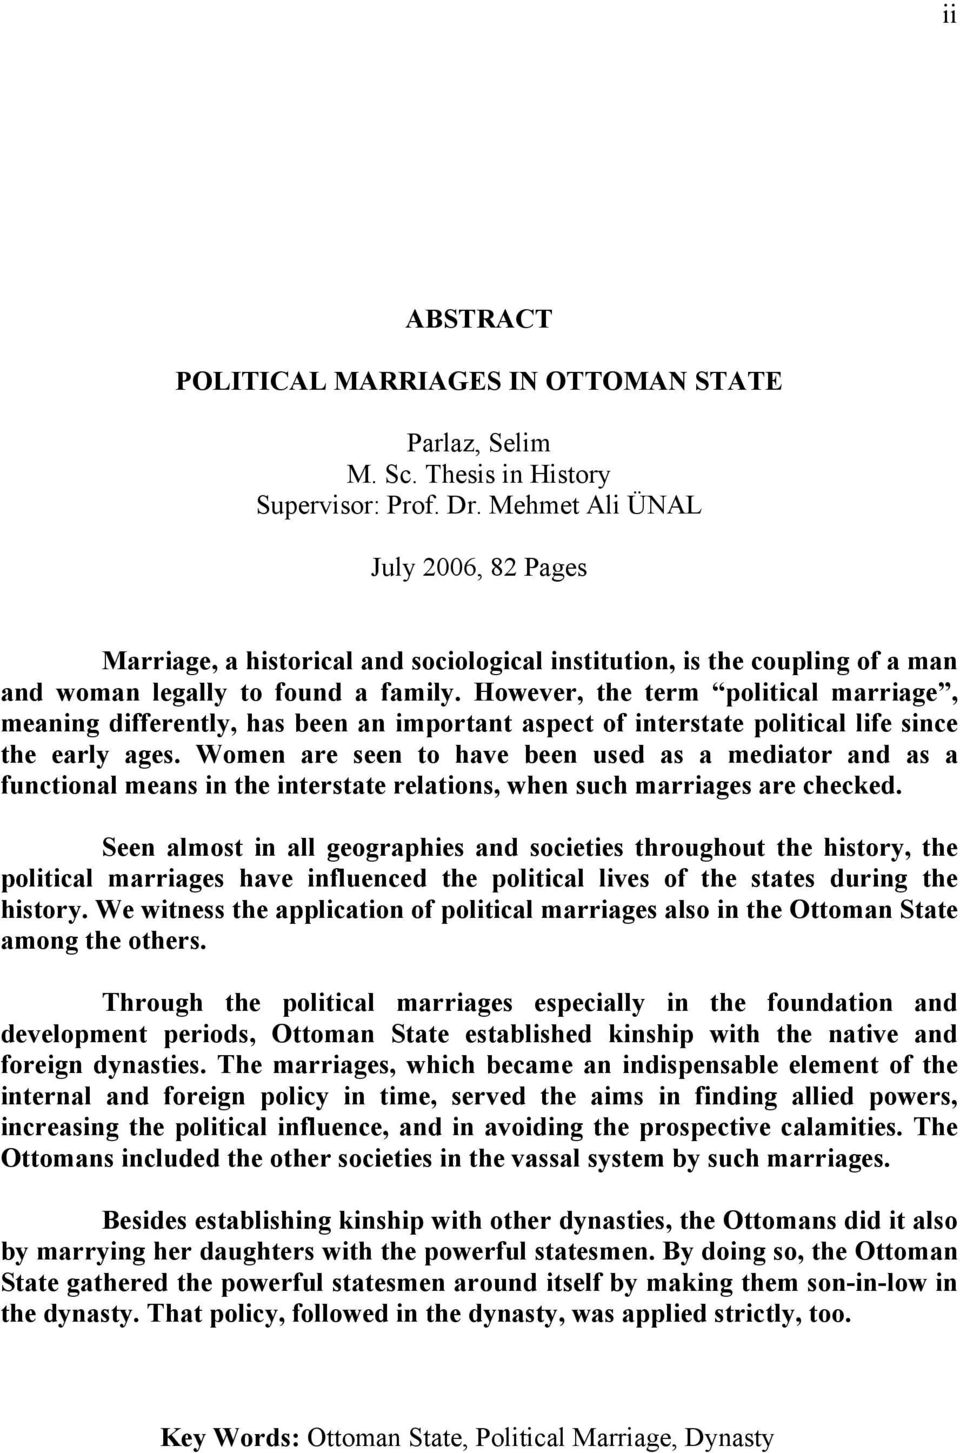 However, the term political marriage, meaning differently, has been an important aspect of interstate political life since the early ages.